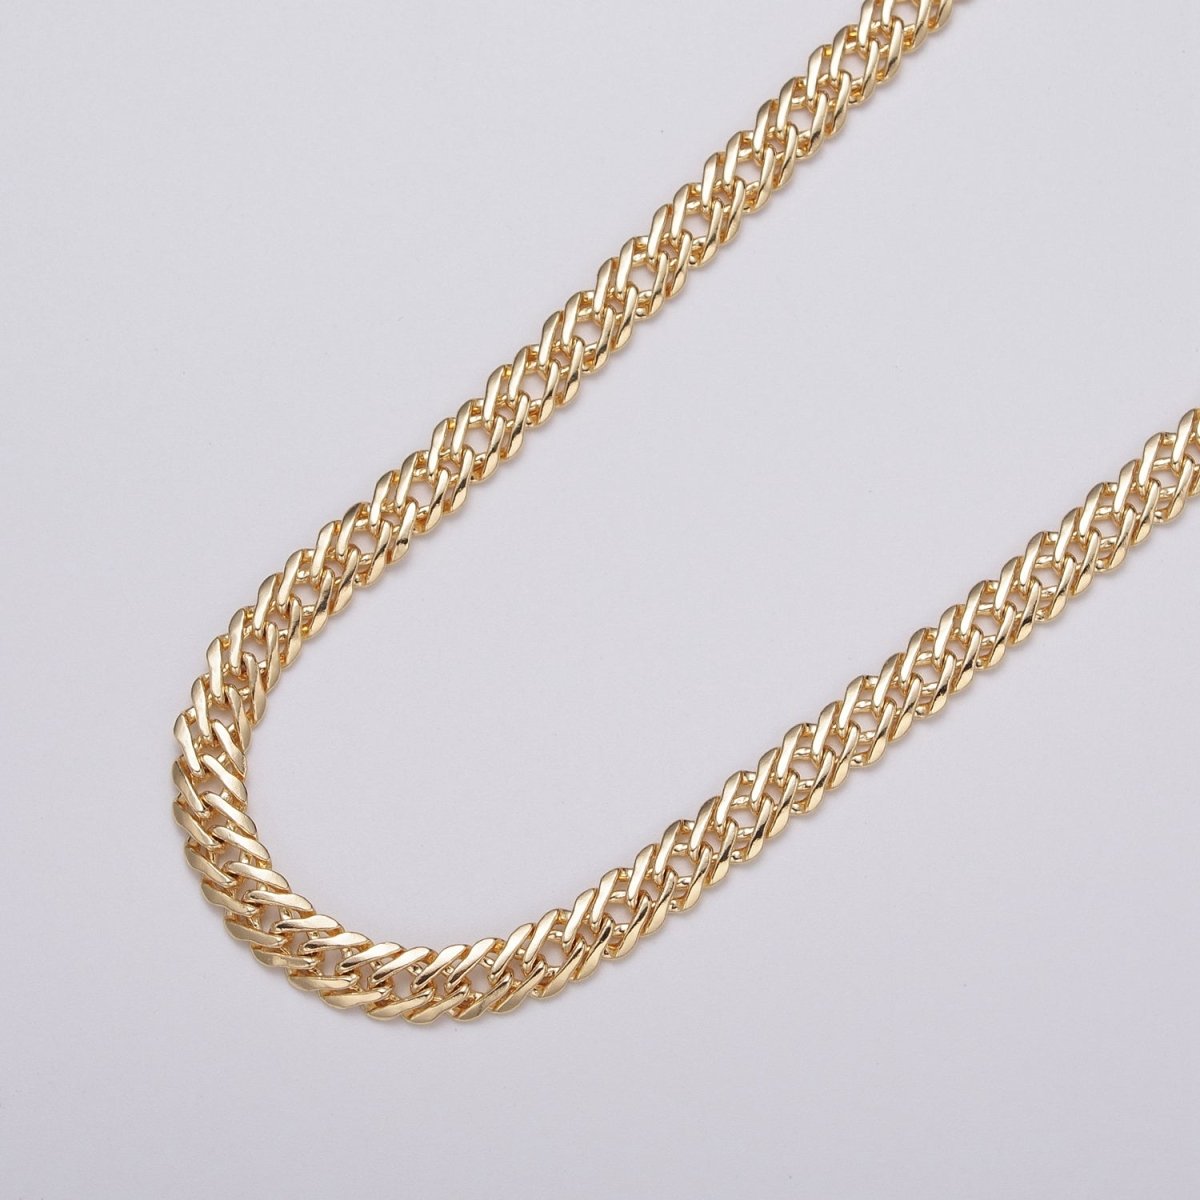 24k Gold Filled 5mm, 8mm Diamond-Cut Flat Double Curb Unfinished Designed Chain by Yard in Gold & Silver | ROLL-1050, -1047, -1103, -1105 Clearance Pricing - DLUXCA